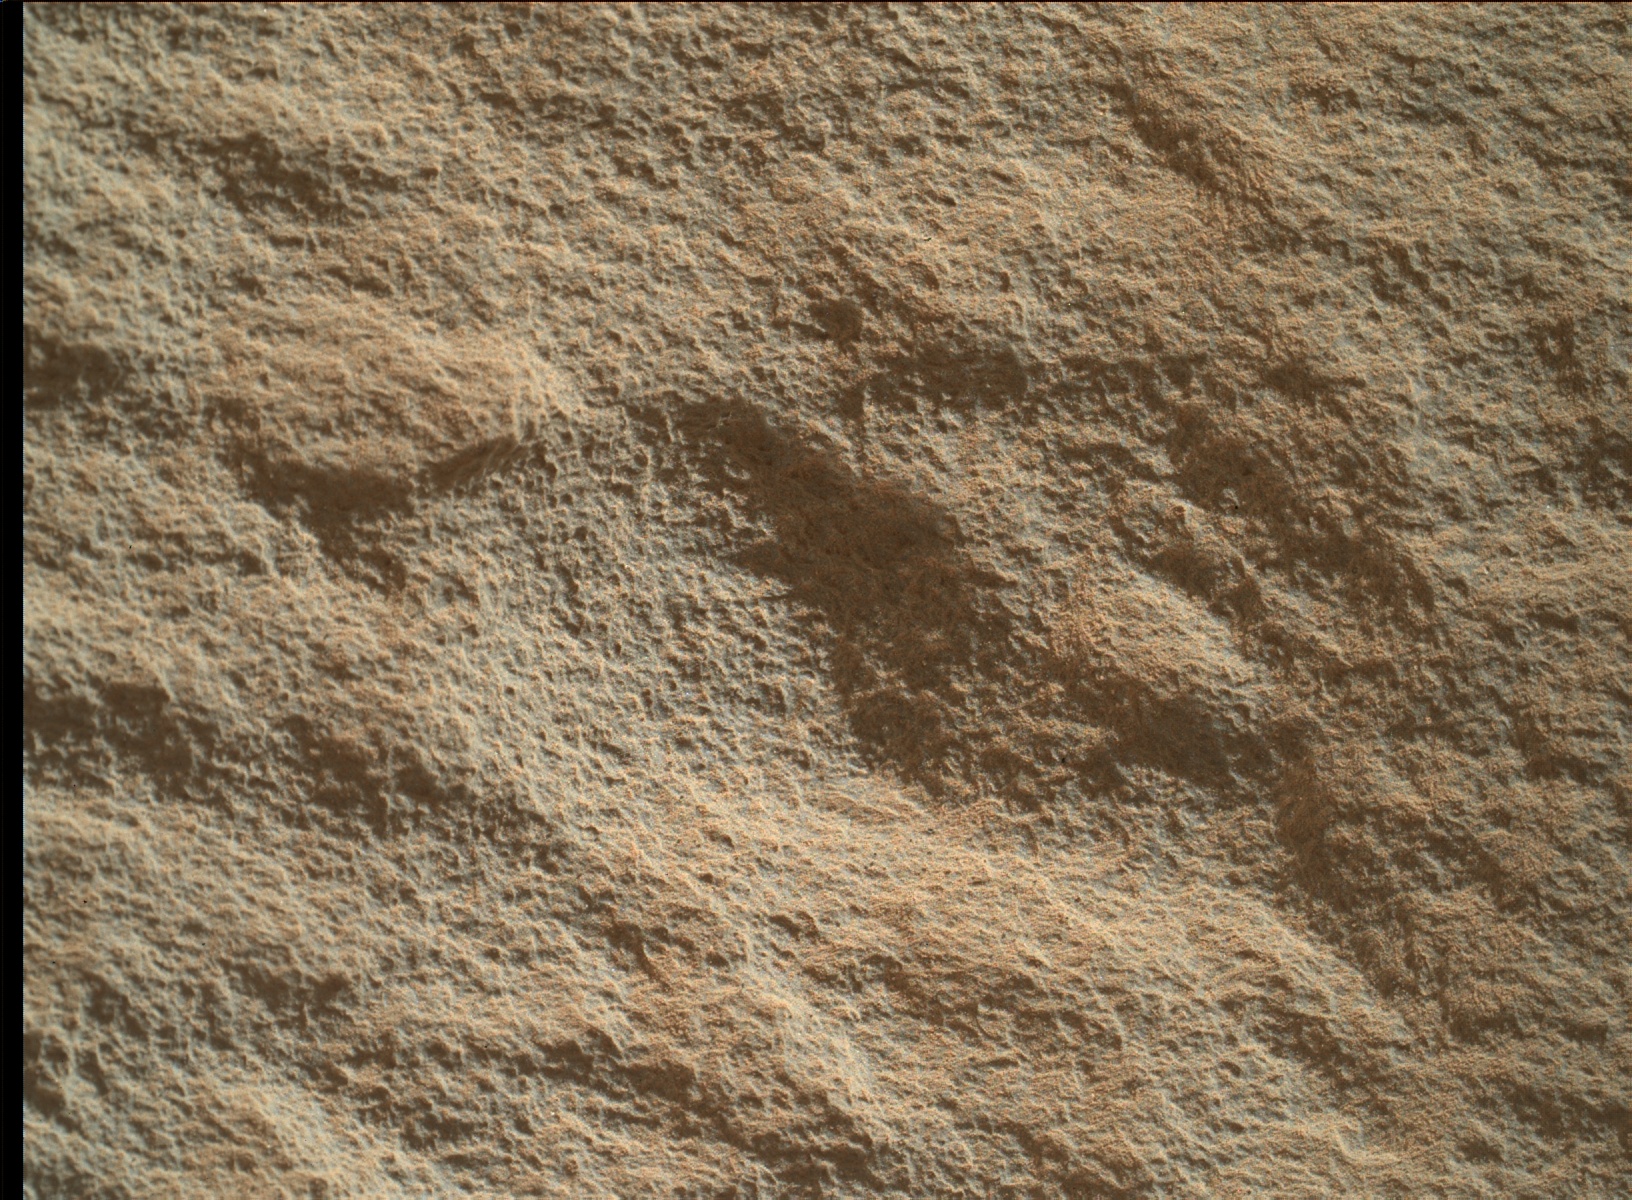 Nasa's Mars rover Curiosity acquired this image using its Mars Hand Lens Imager (MAHLI) on Sol 322